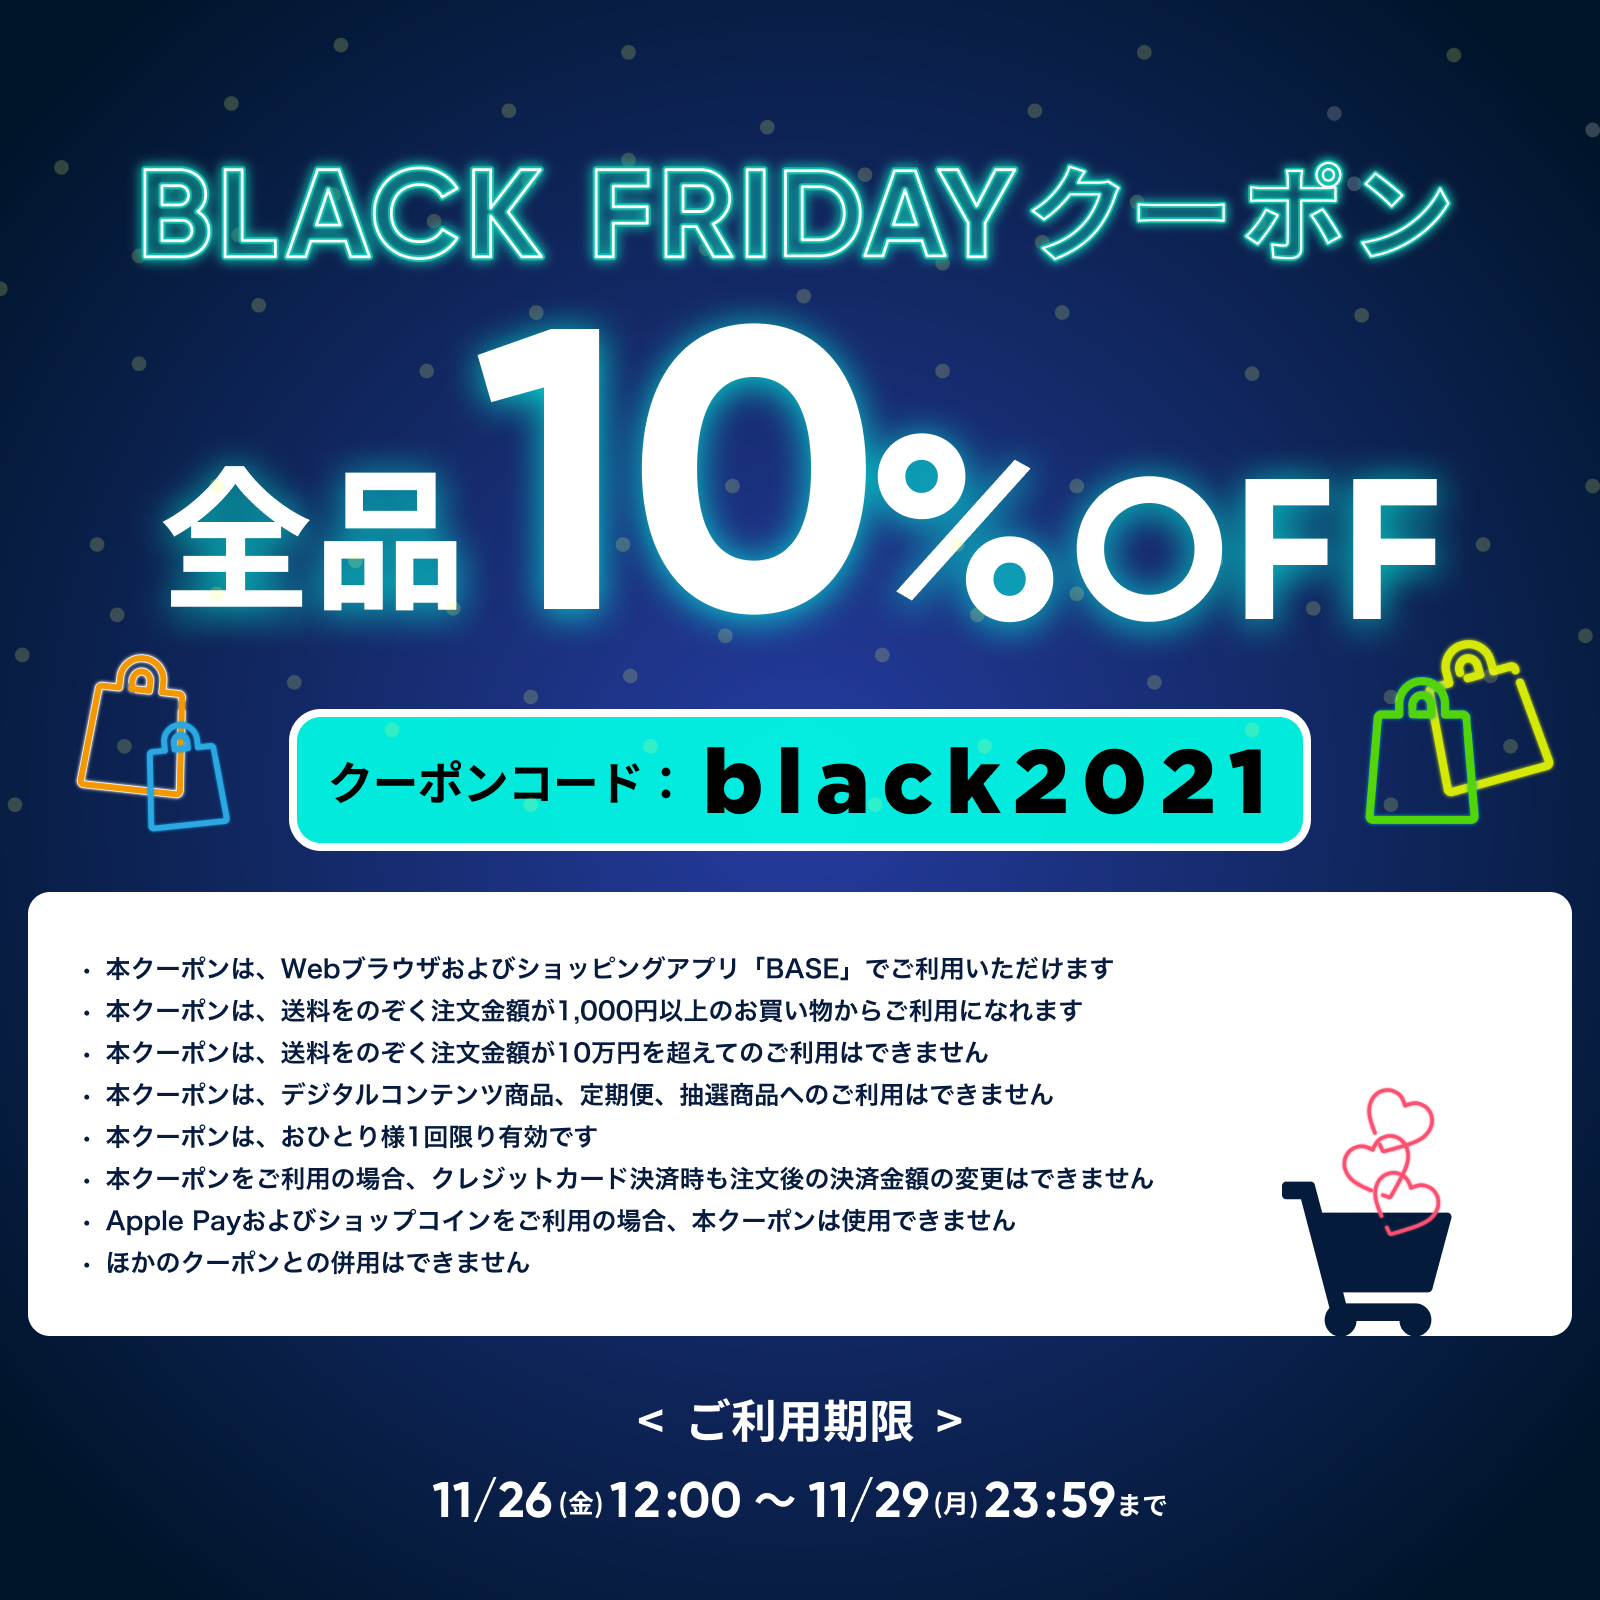 【BLACK FRIDAY】"10%OFF"クーポン配布のご案内